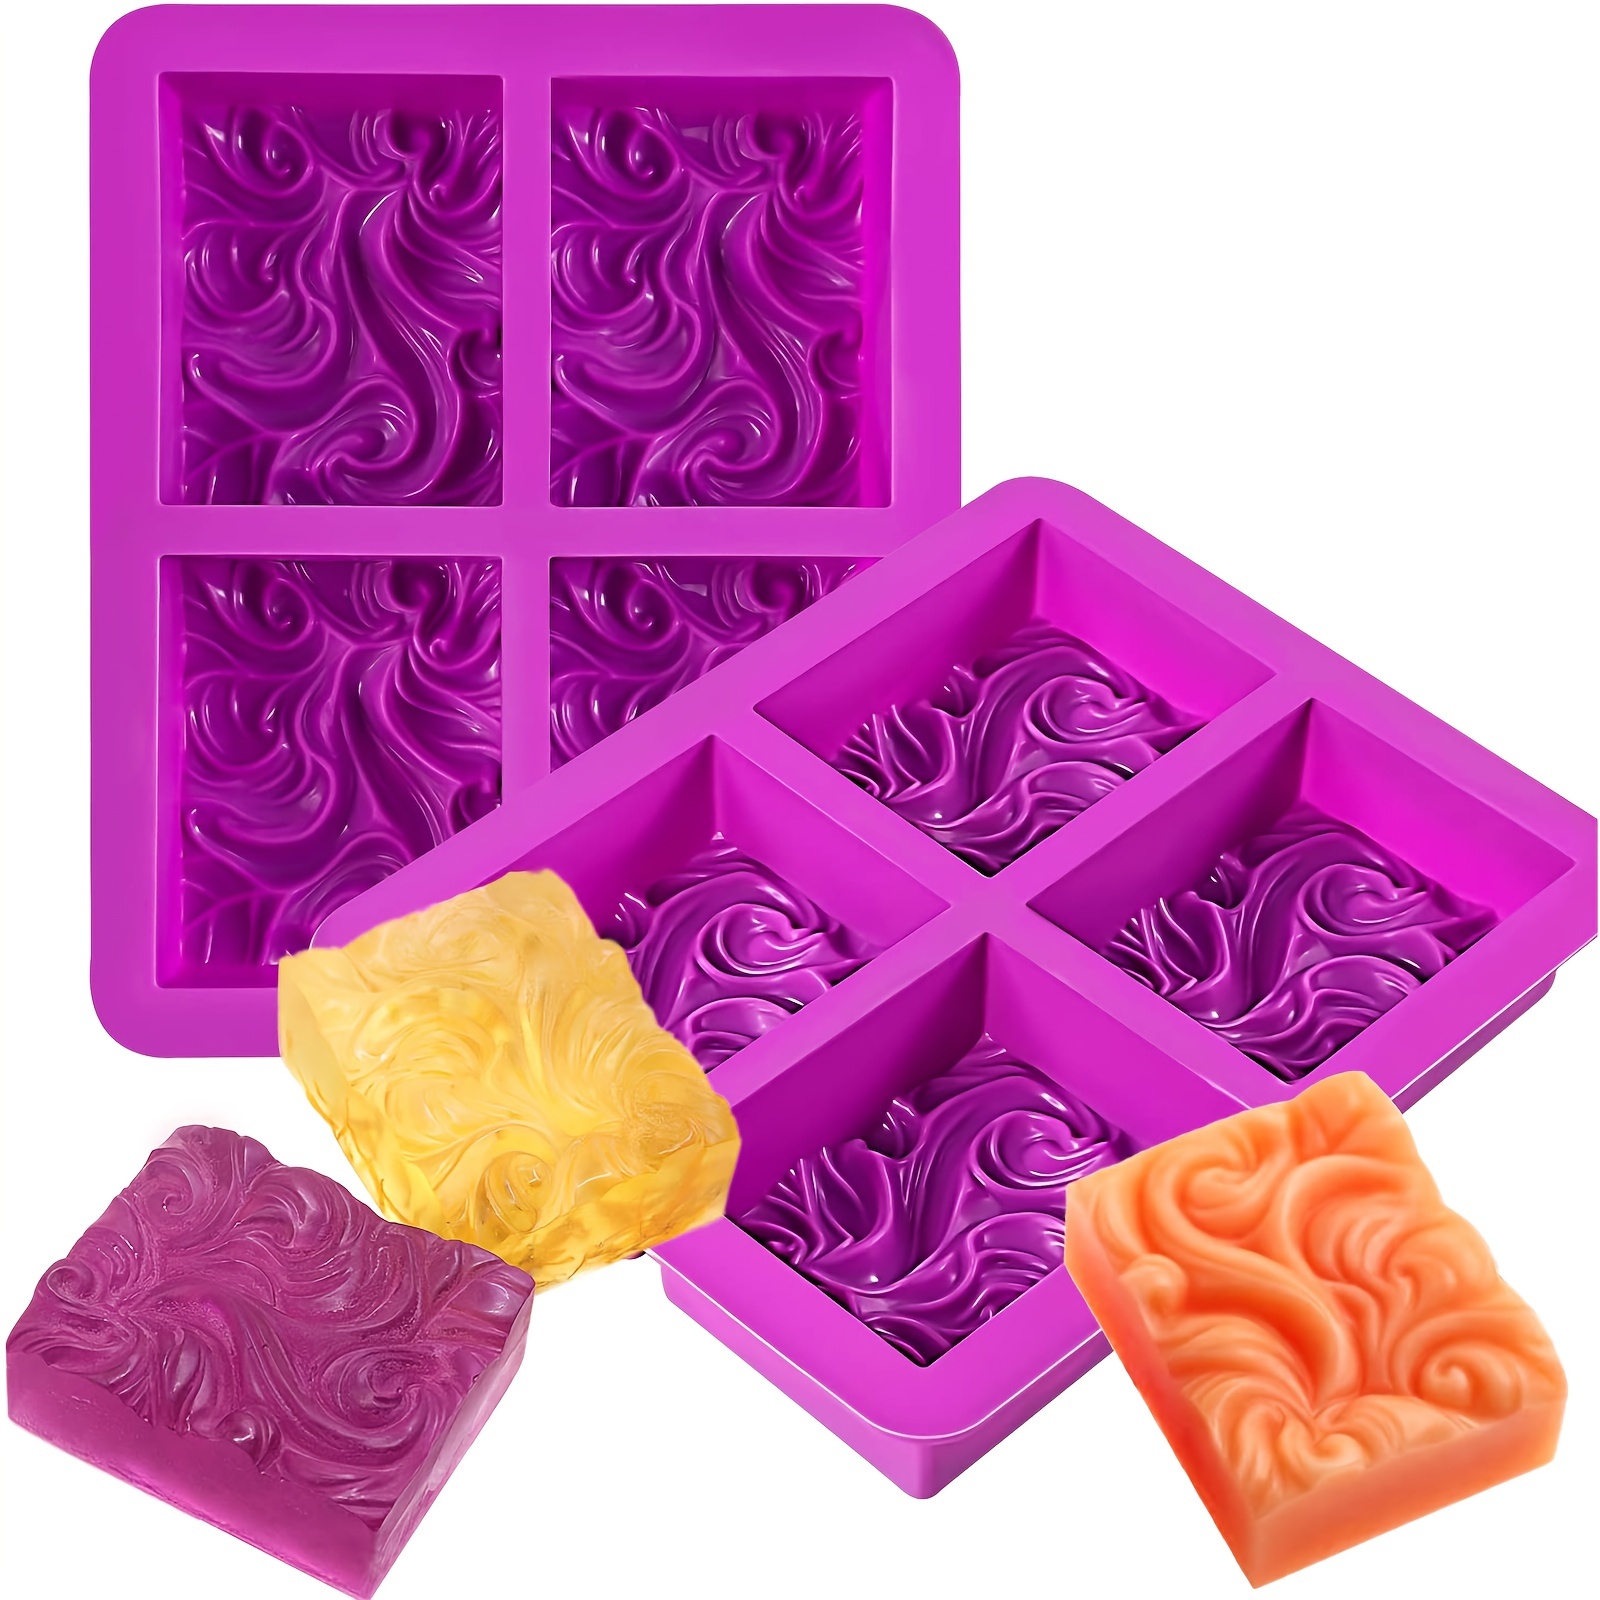 Newk Silicone Soap Square Molds, DIY Handmade Soap Molds with Ocean Wave Pattern for Milk Soap (3.5 oz Cavities)